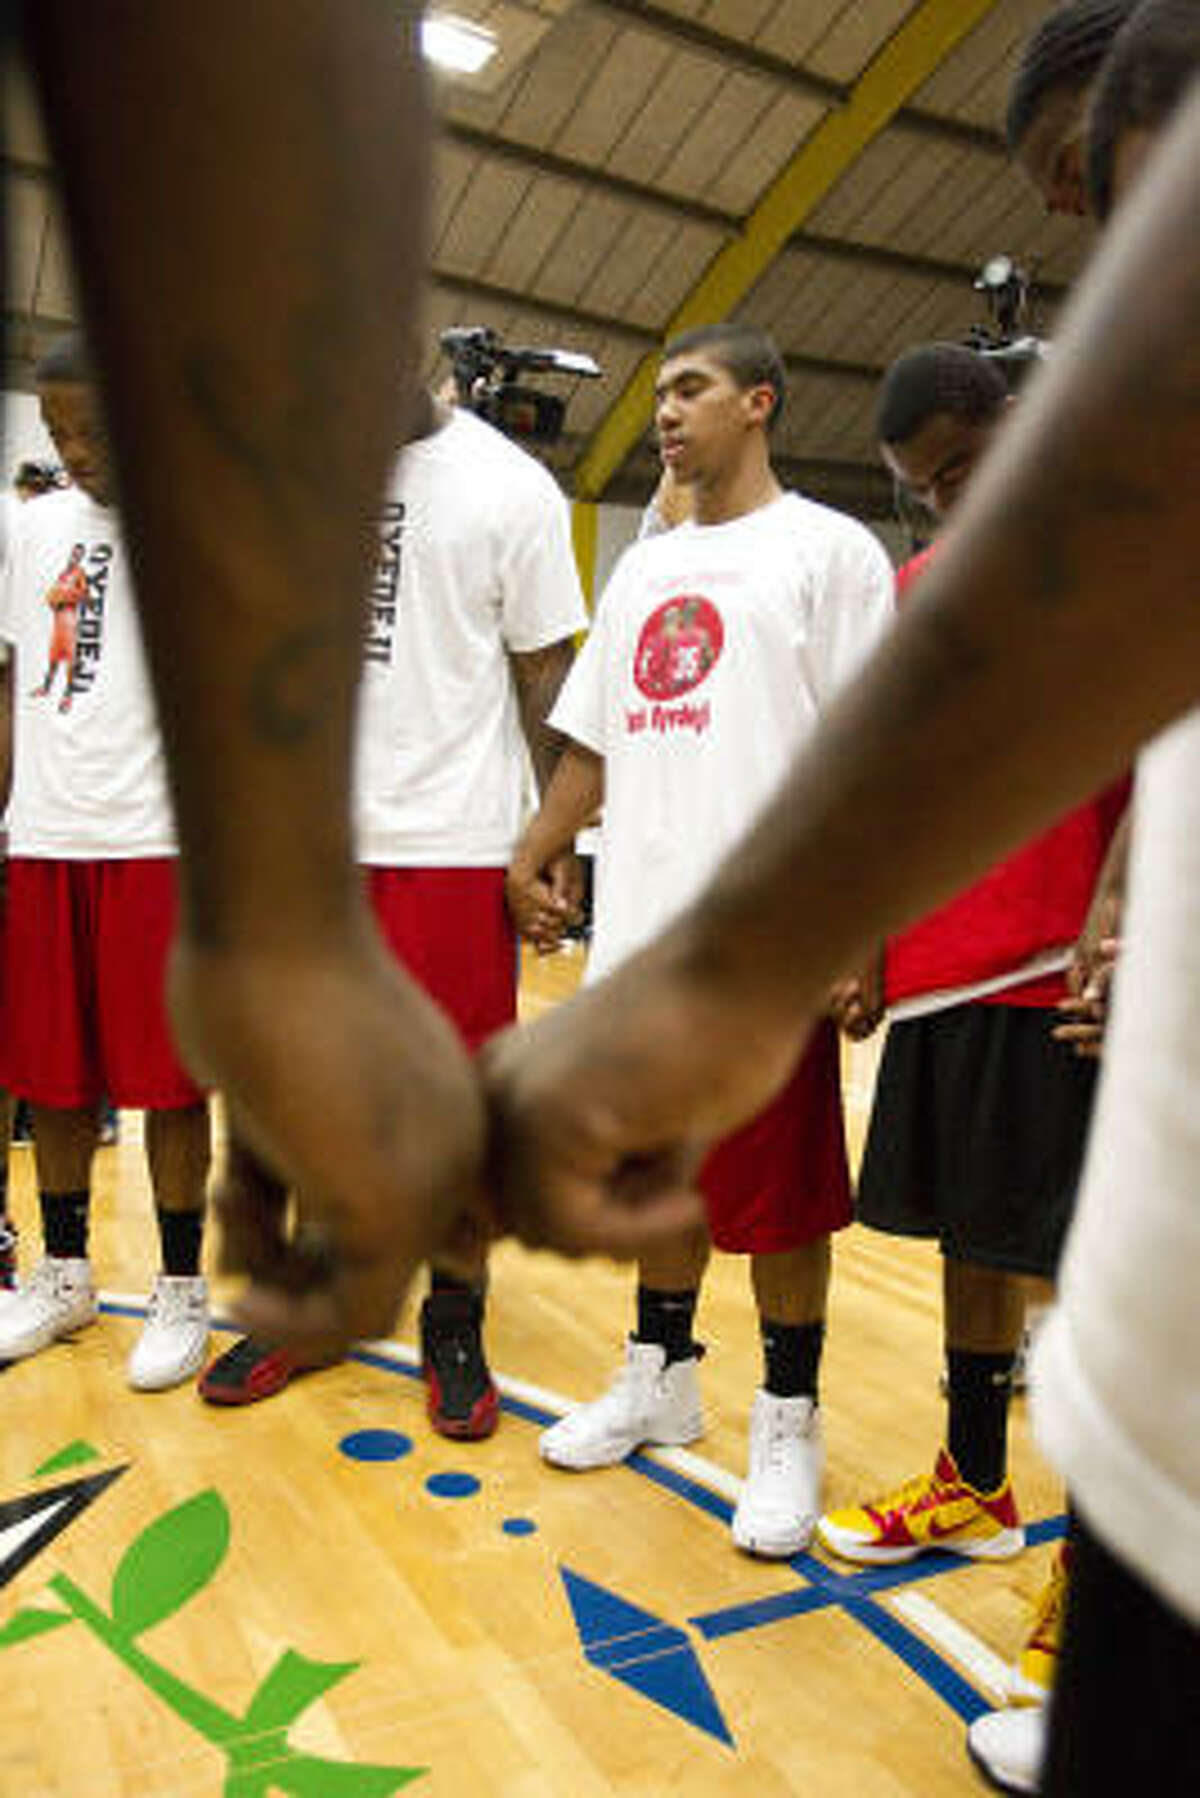 Jonathan Evans leads Bellaire and Yates high school in a prayer before a charity basketball game in memory of Tobi Oyedeji.